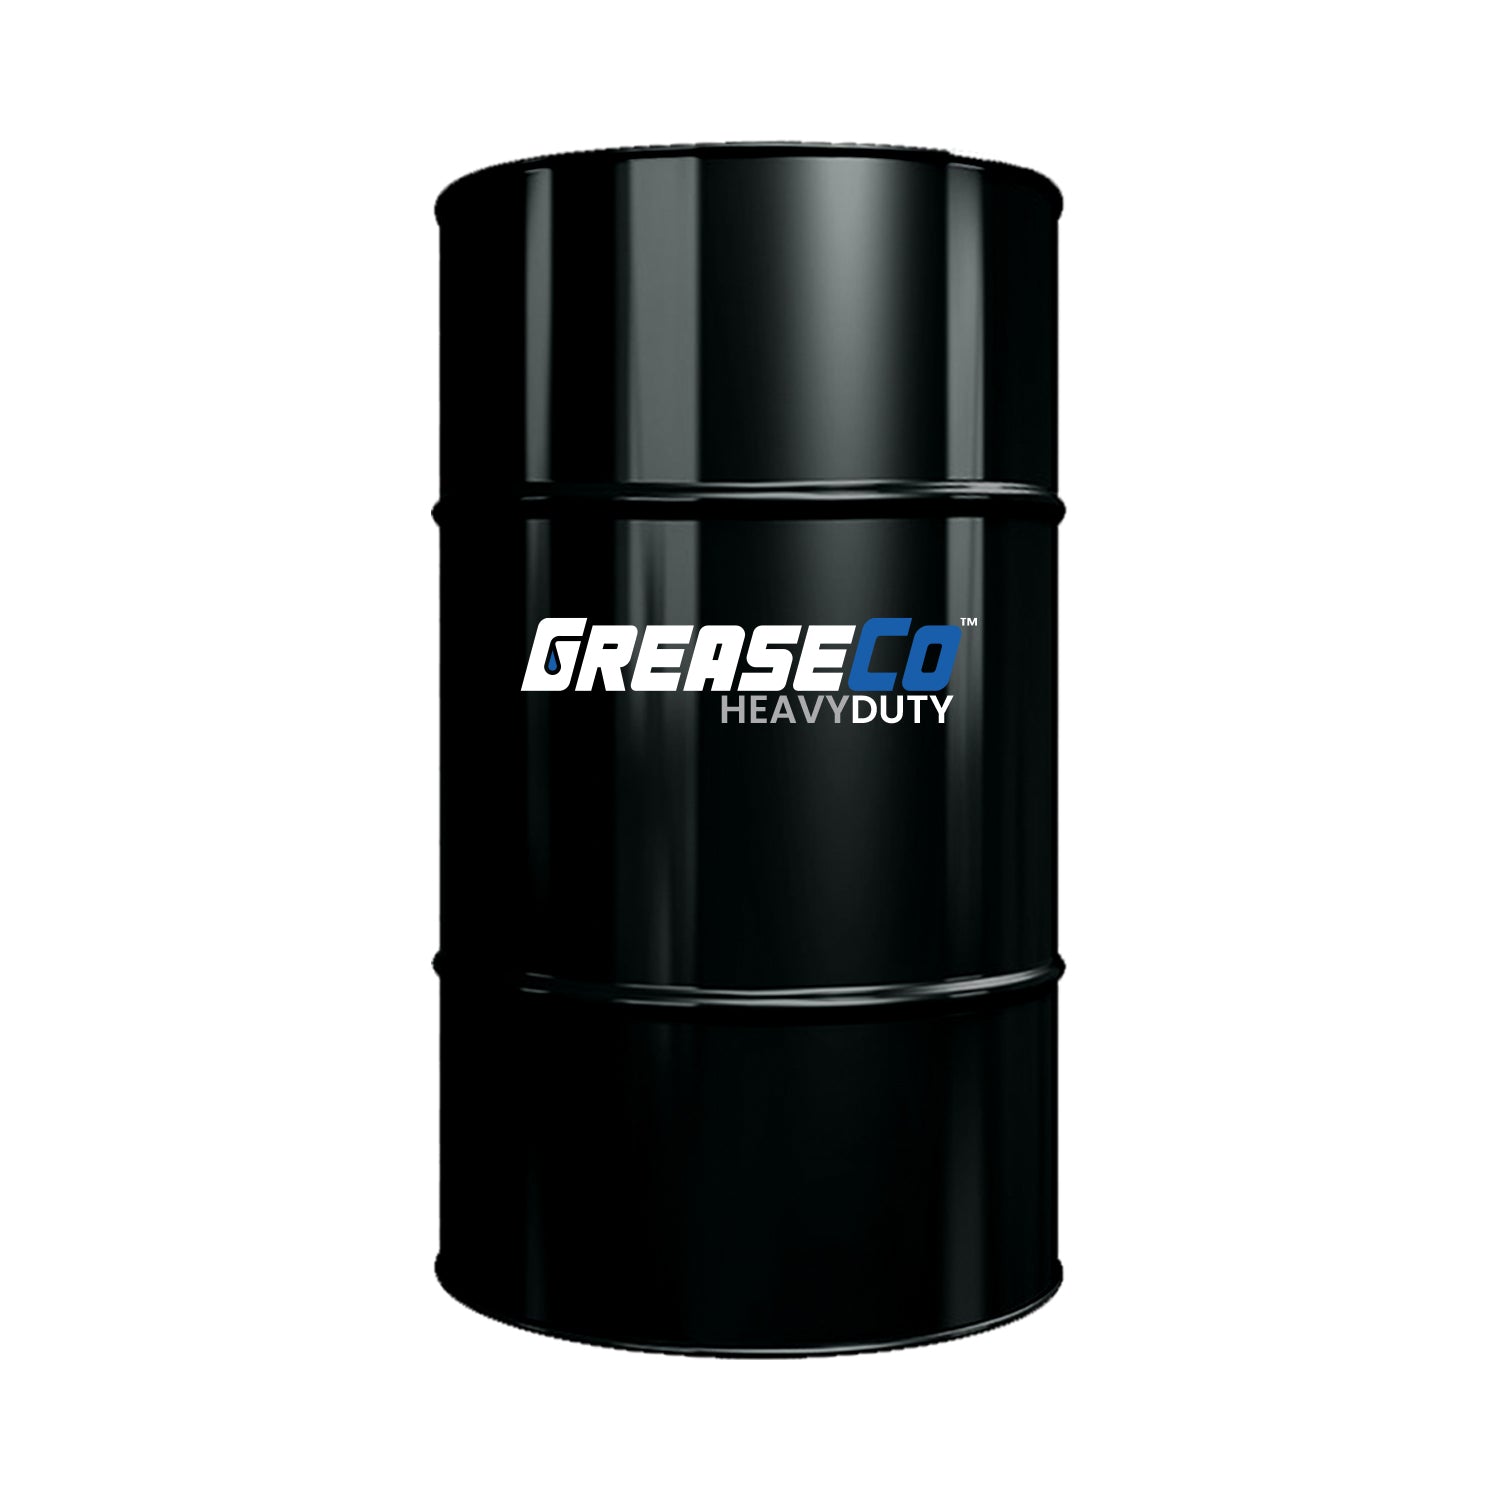 Lithium Complex Red and Tacky High Temperature EP Heavy Duty Grease 120 LB Keg of GreaseCo HeavyDuty